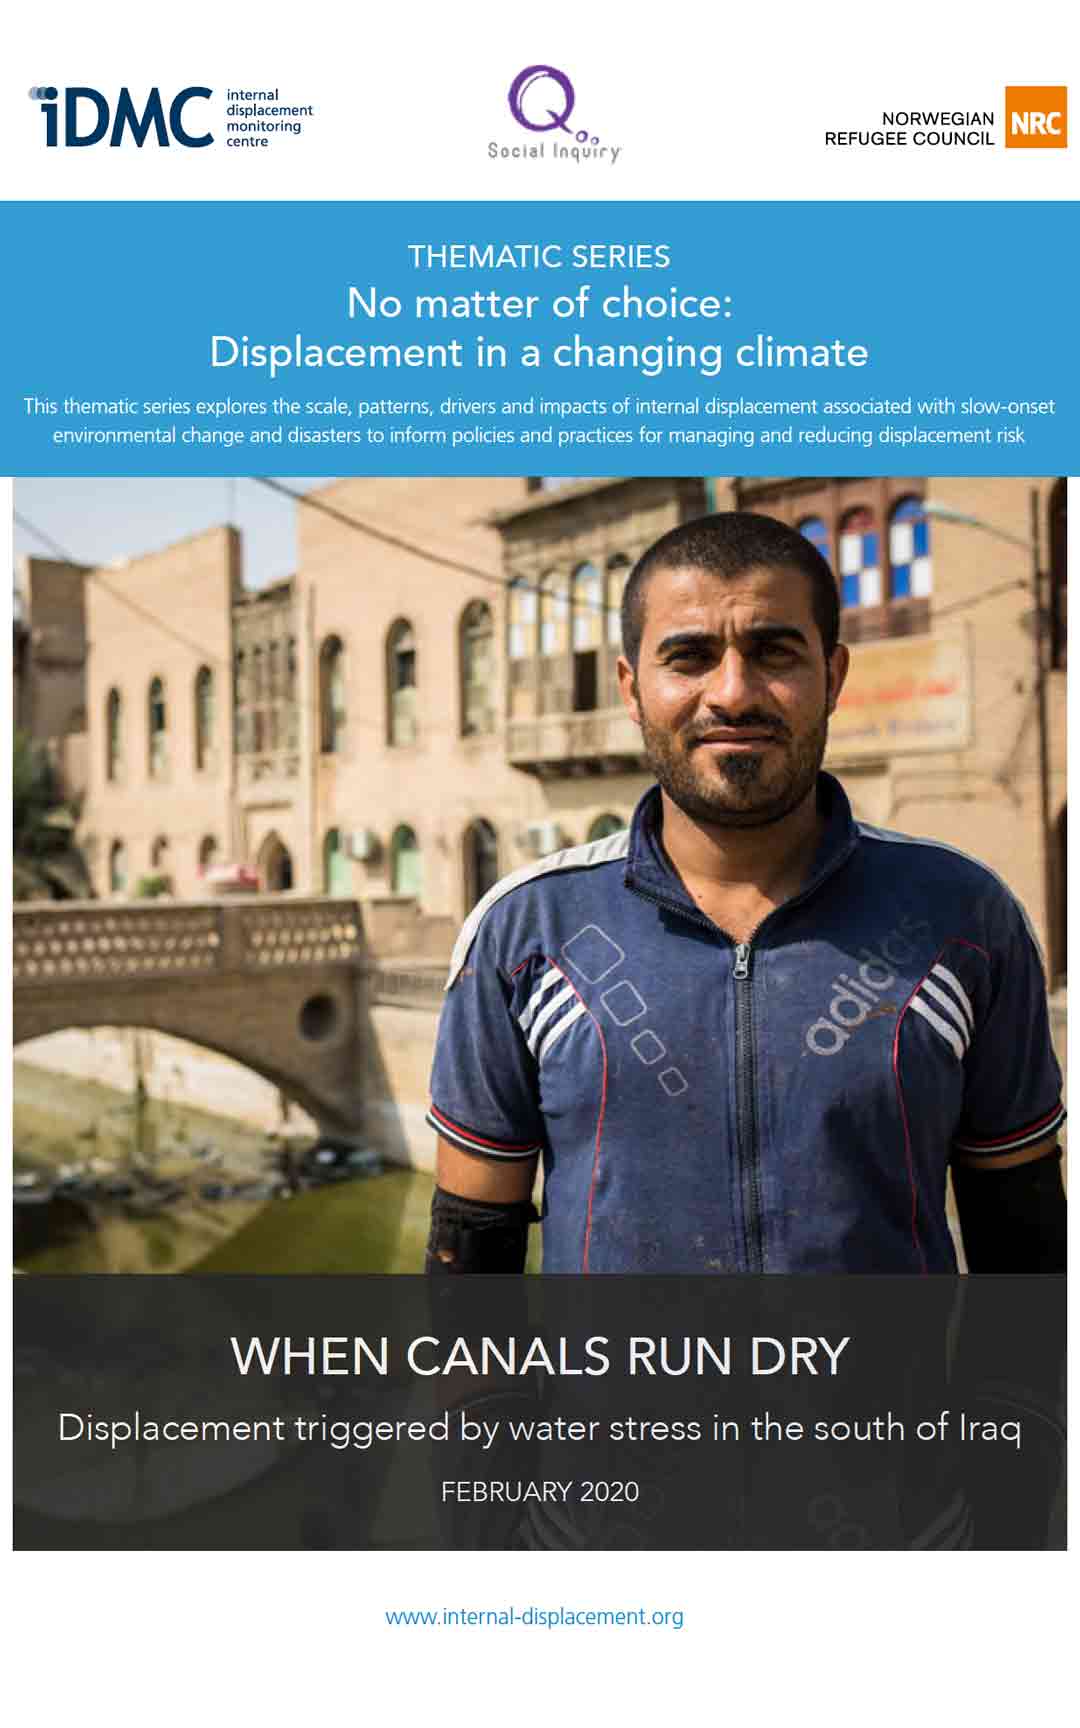 When canals run dry: Displacement triggered by water stress in the south of Iraq